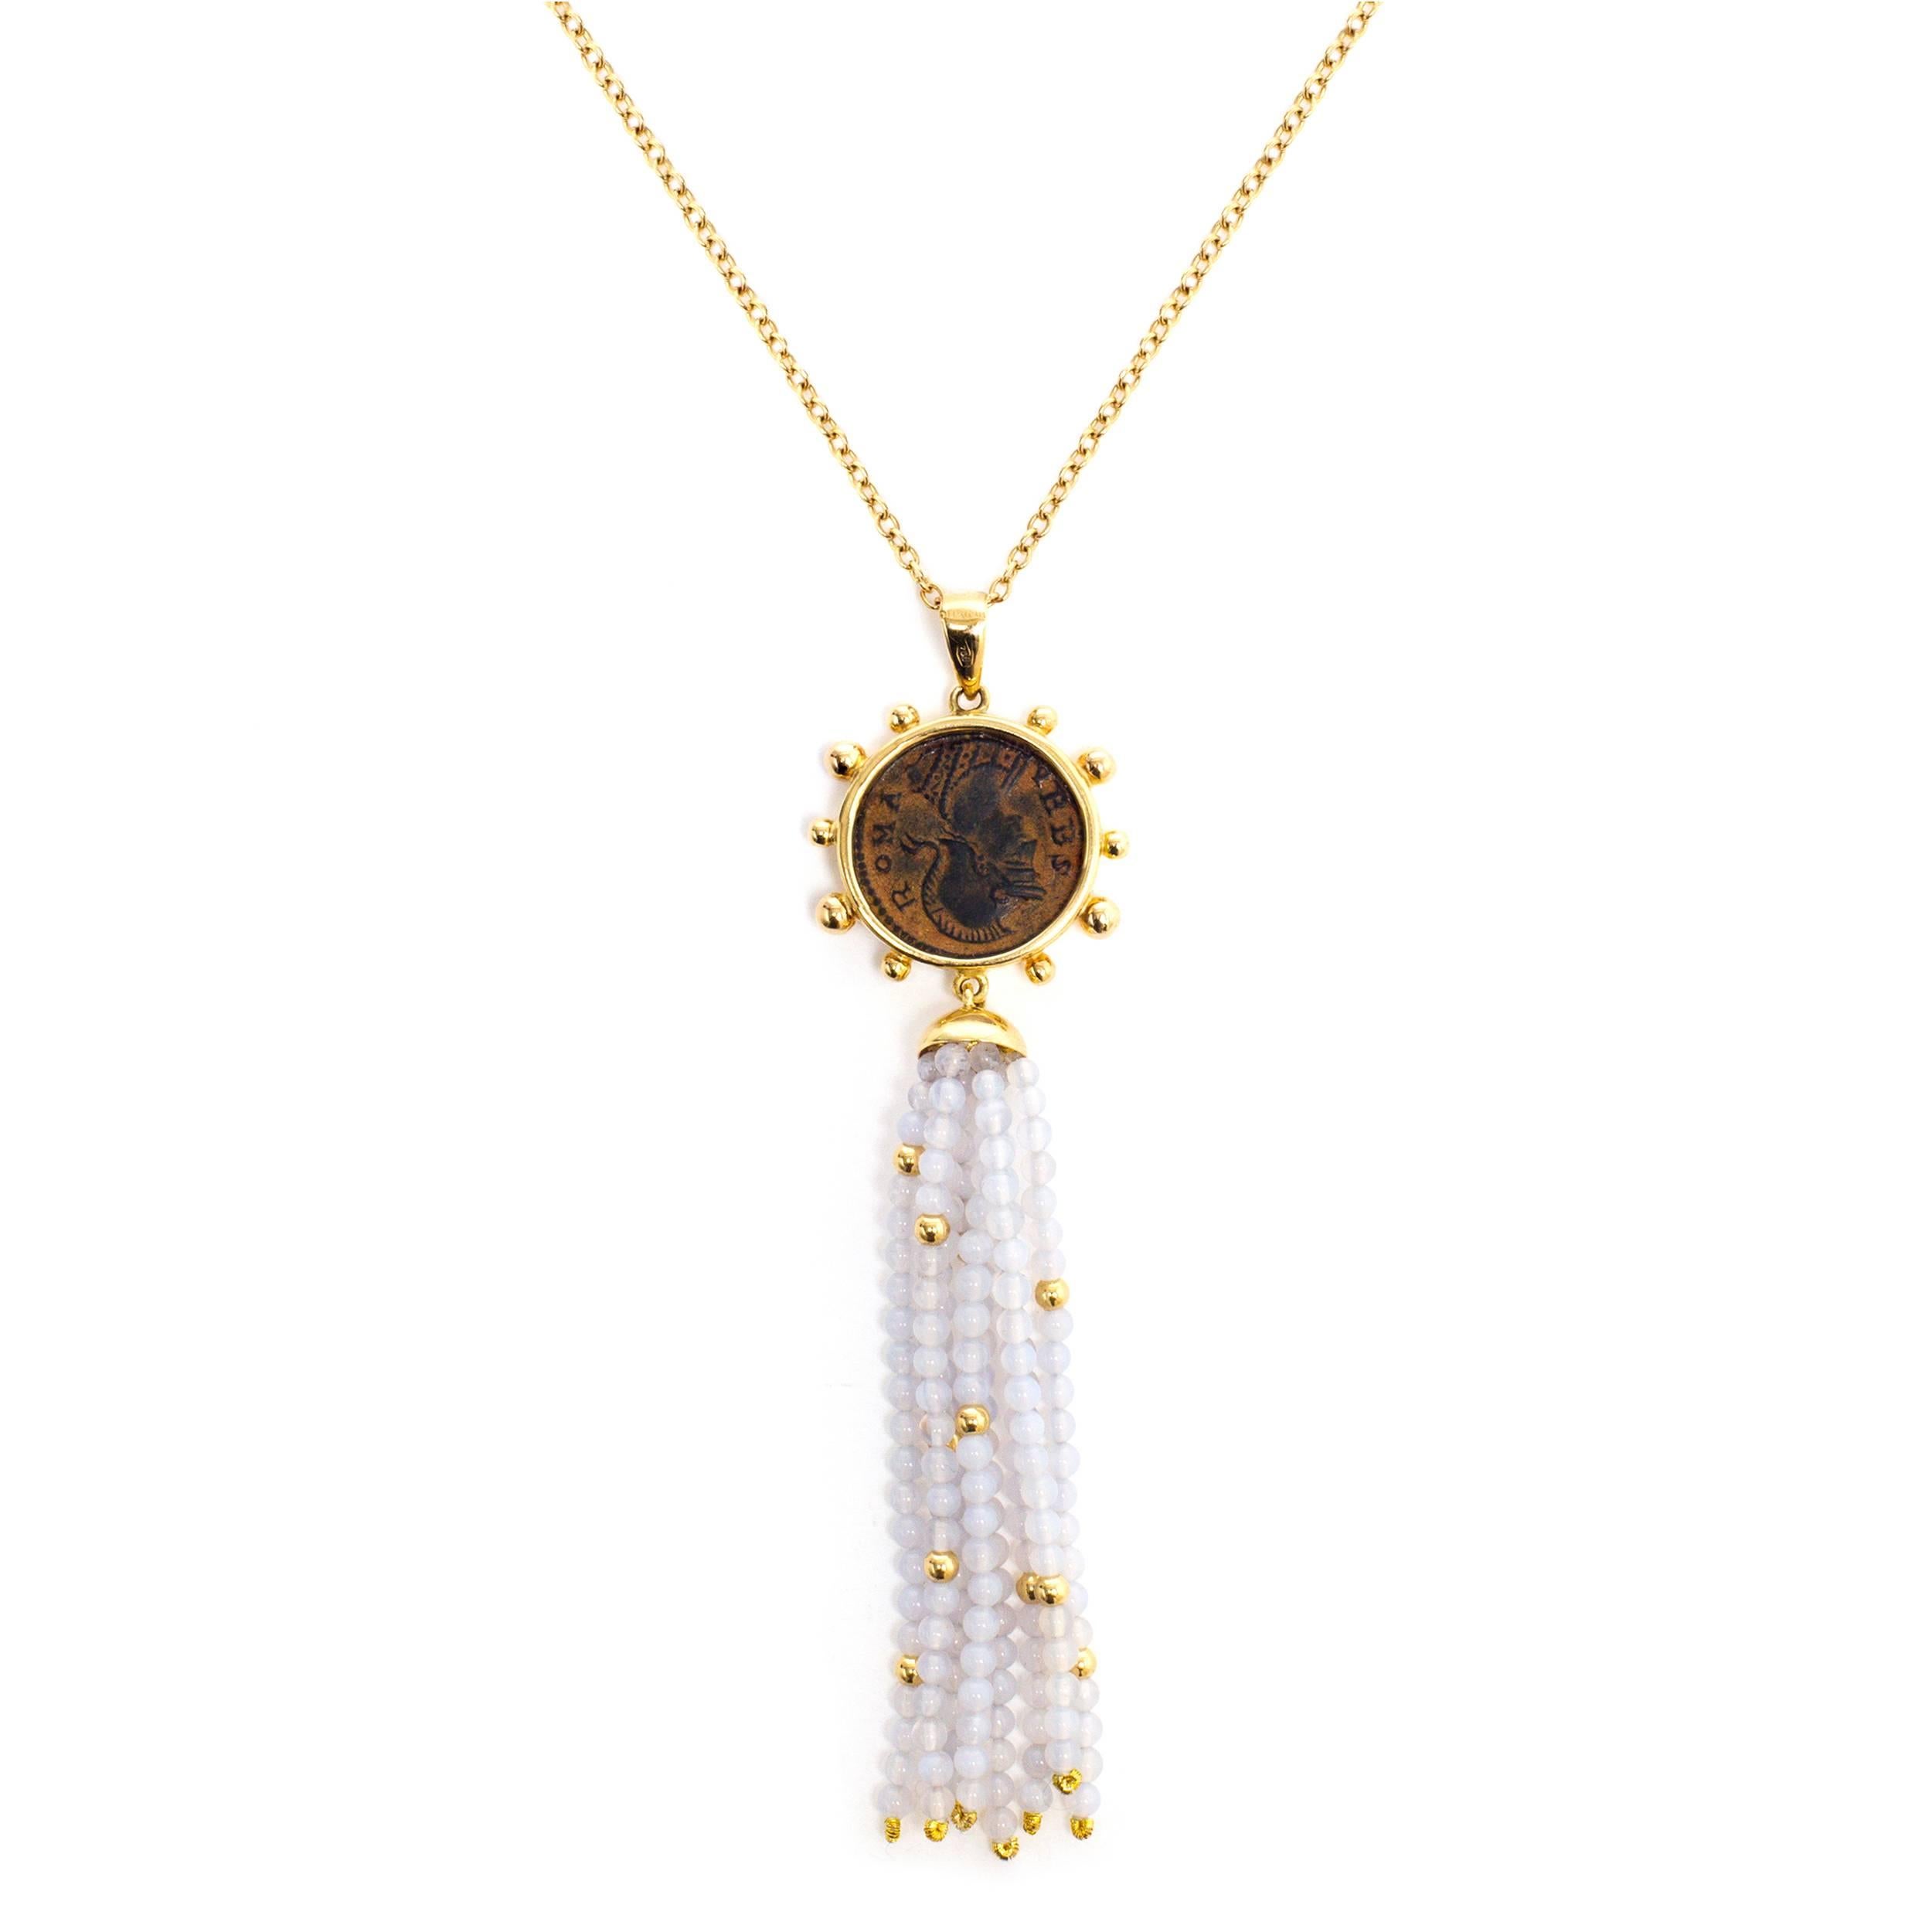 This DUBINI coin necklace from the 'Empires' collection features an authentic Roman Imperial coin minted circa 330-337 A.D. set in 18K yellow gold with chalcedony and gold beaded tassel..

Depicted on the coin: She-wolf suckling Romulus and Remus